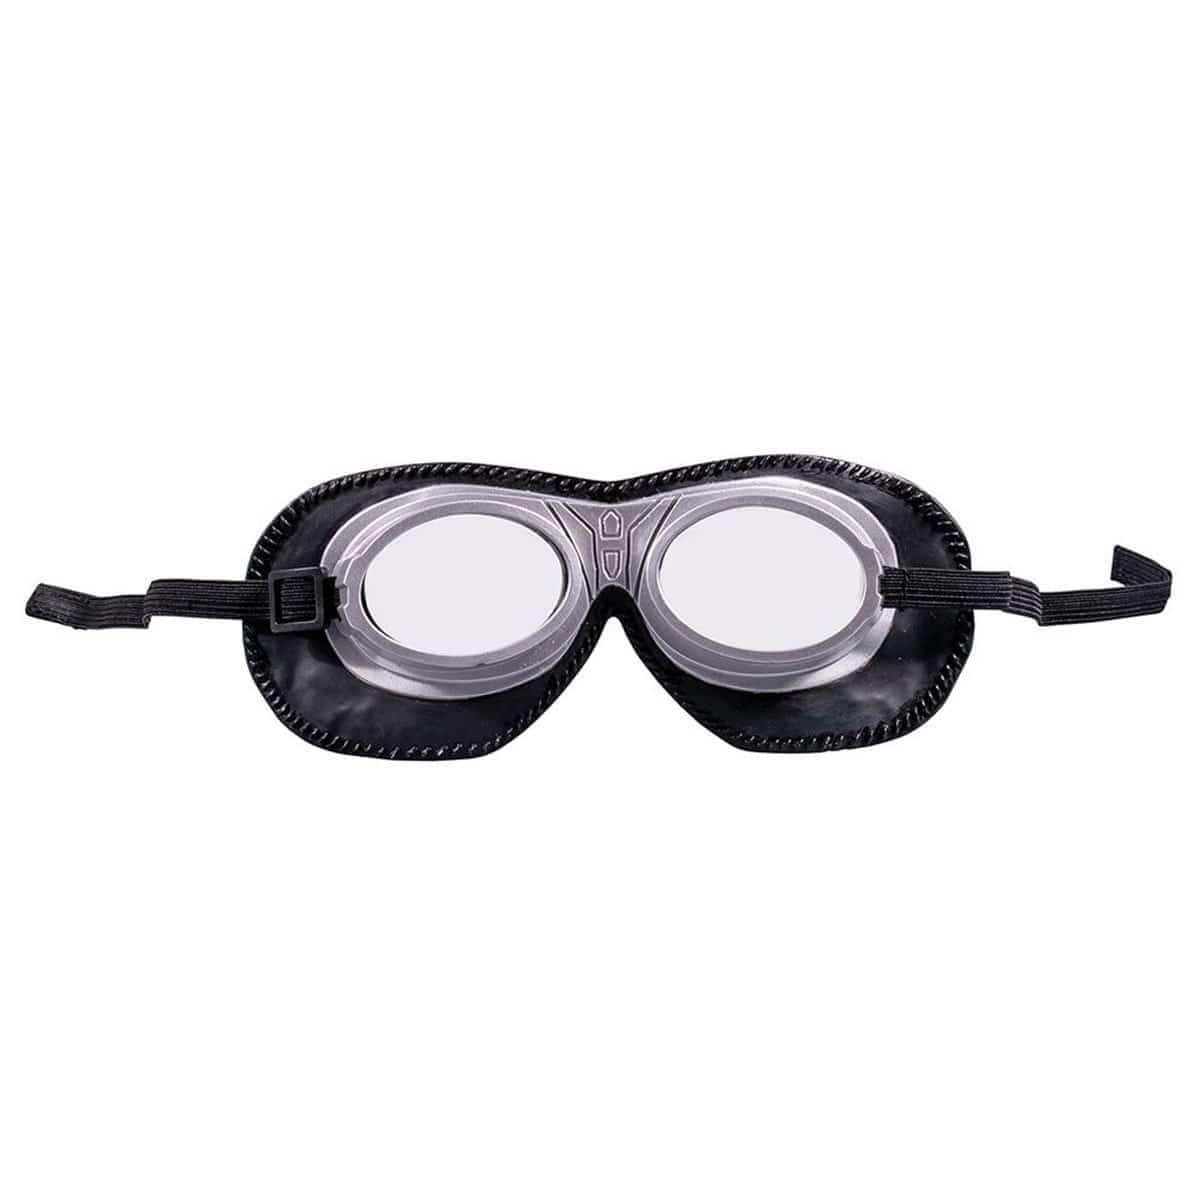 Buy Costume Accessories Quidditch Goggles, Harry Potter sold at Party Expert